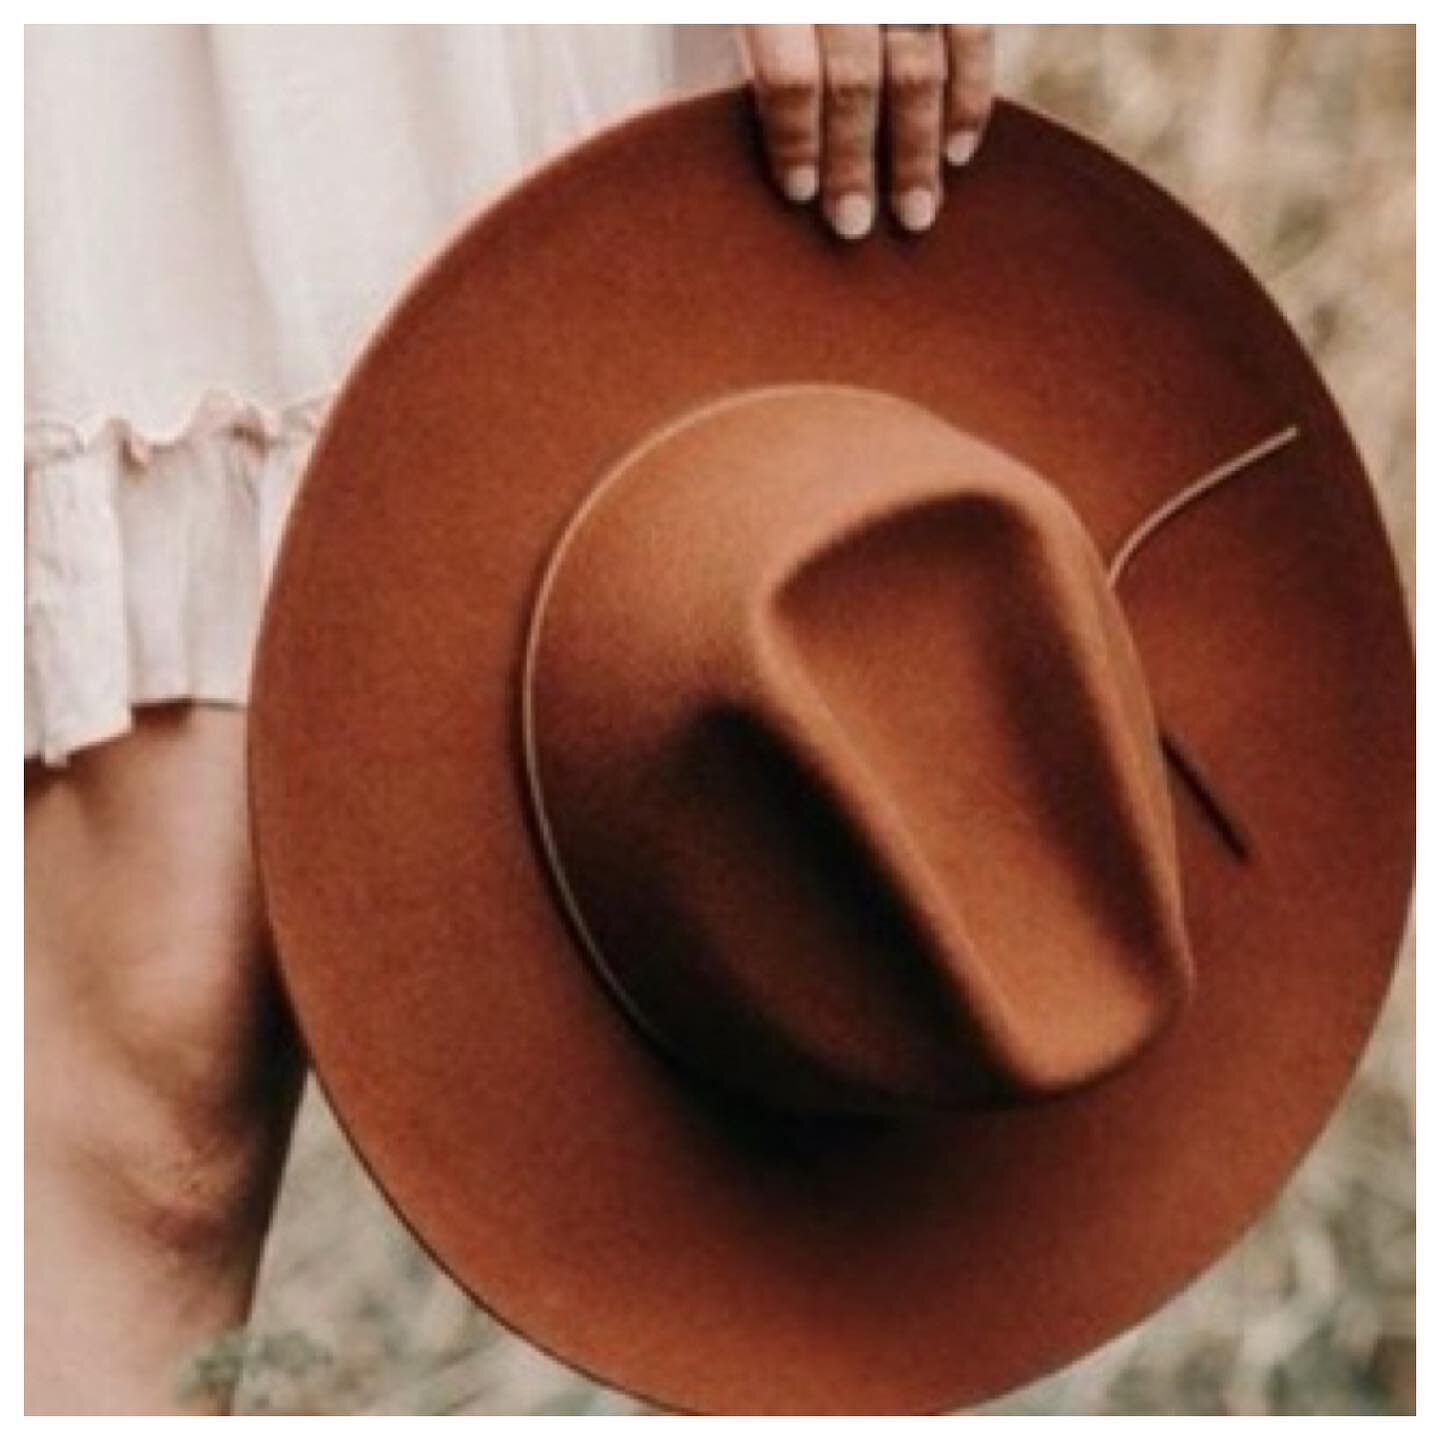 GEORGIA🌊 

everyone&rsquo;s favourite western style. comes in cognac and noir. shop all @shopwestvon hats on our website, curbside pickup still available! link in bio | #thesalteblond #thesalteblondsalon #shoplocalyyc #supportsmallbusinessyyc